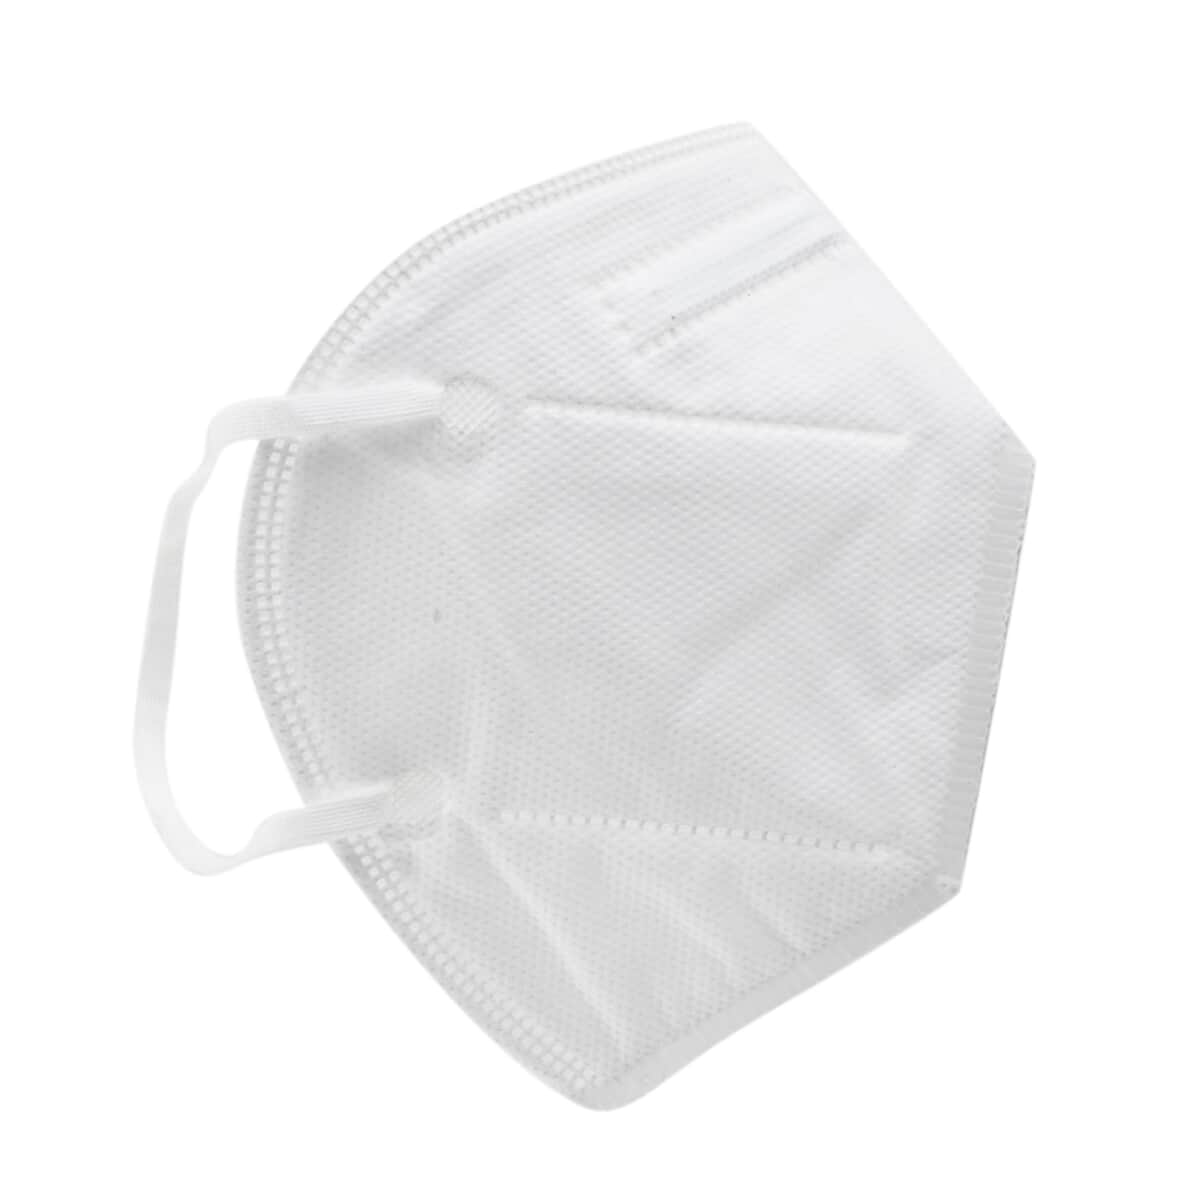 Set of 20 KN95 Disposable Protection Masks 5 Layer (Non-Returnable) image number 5